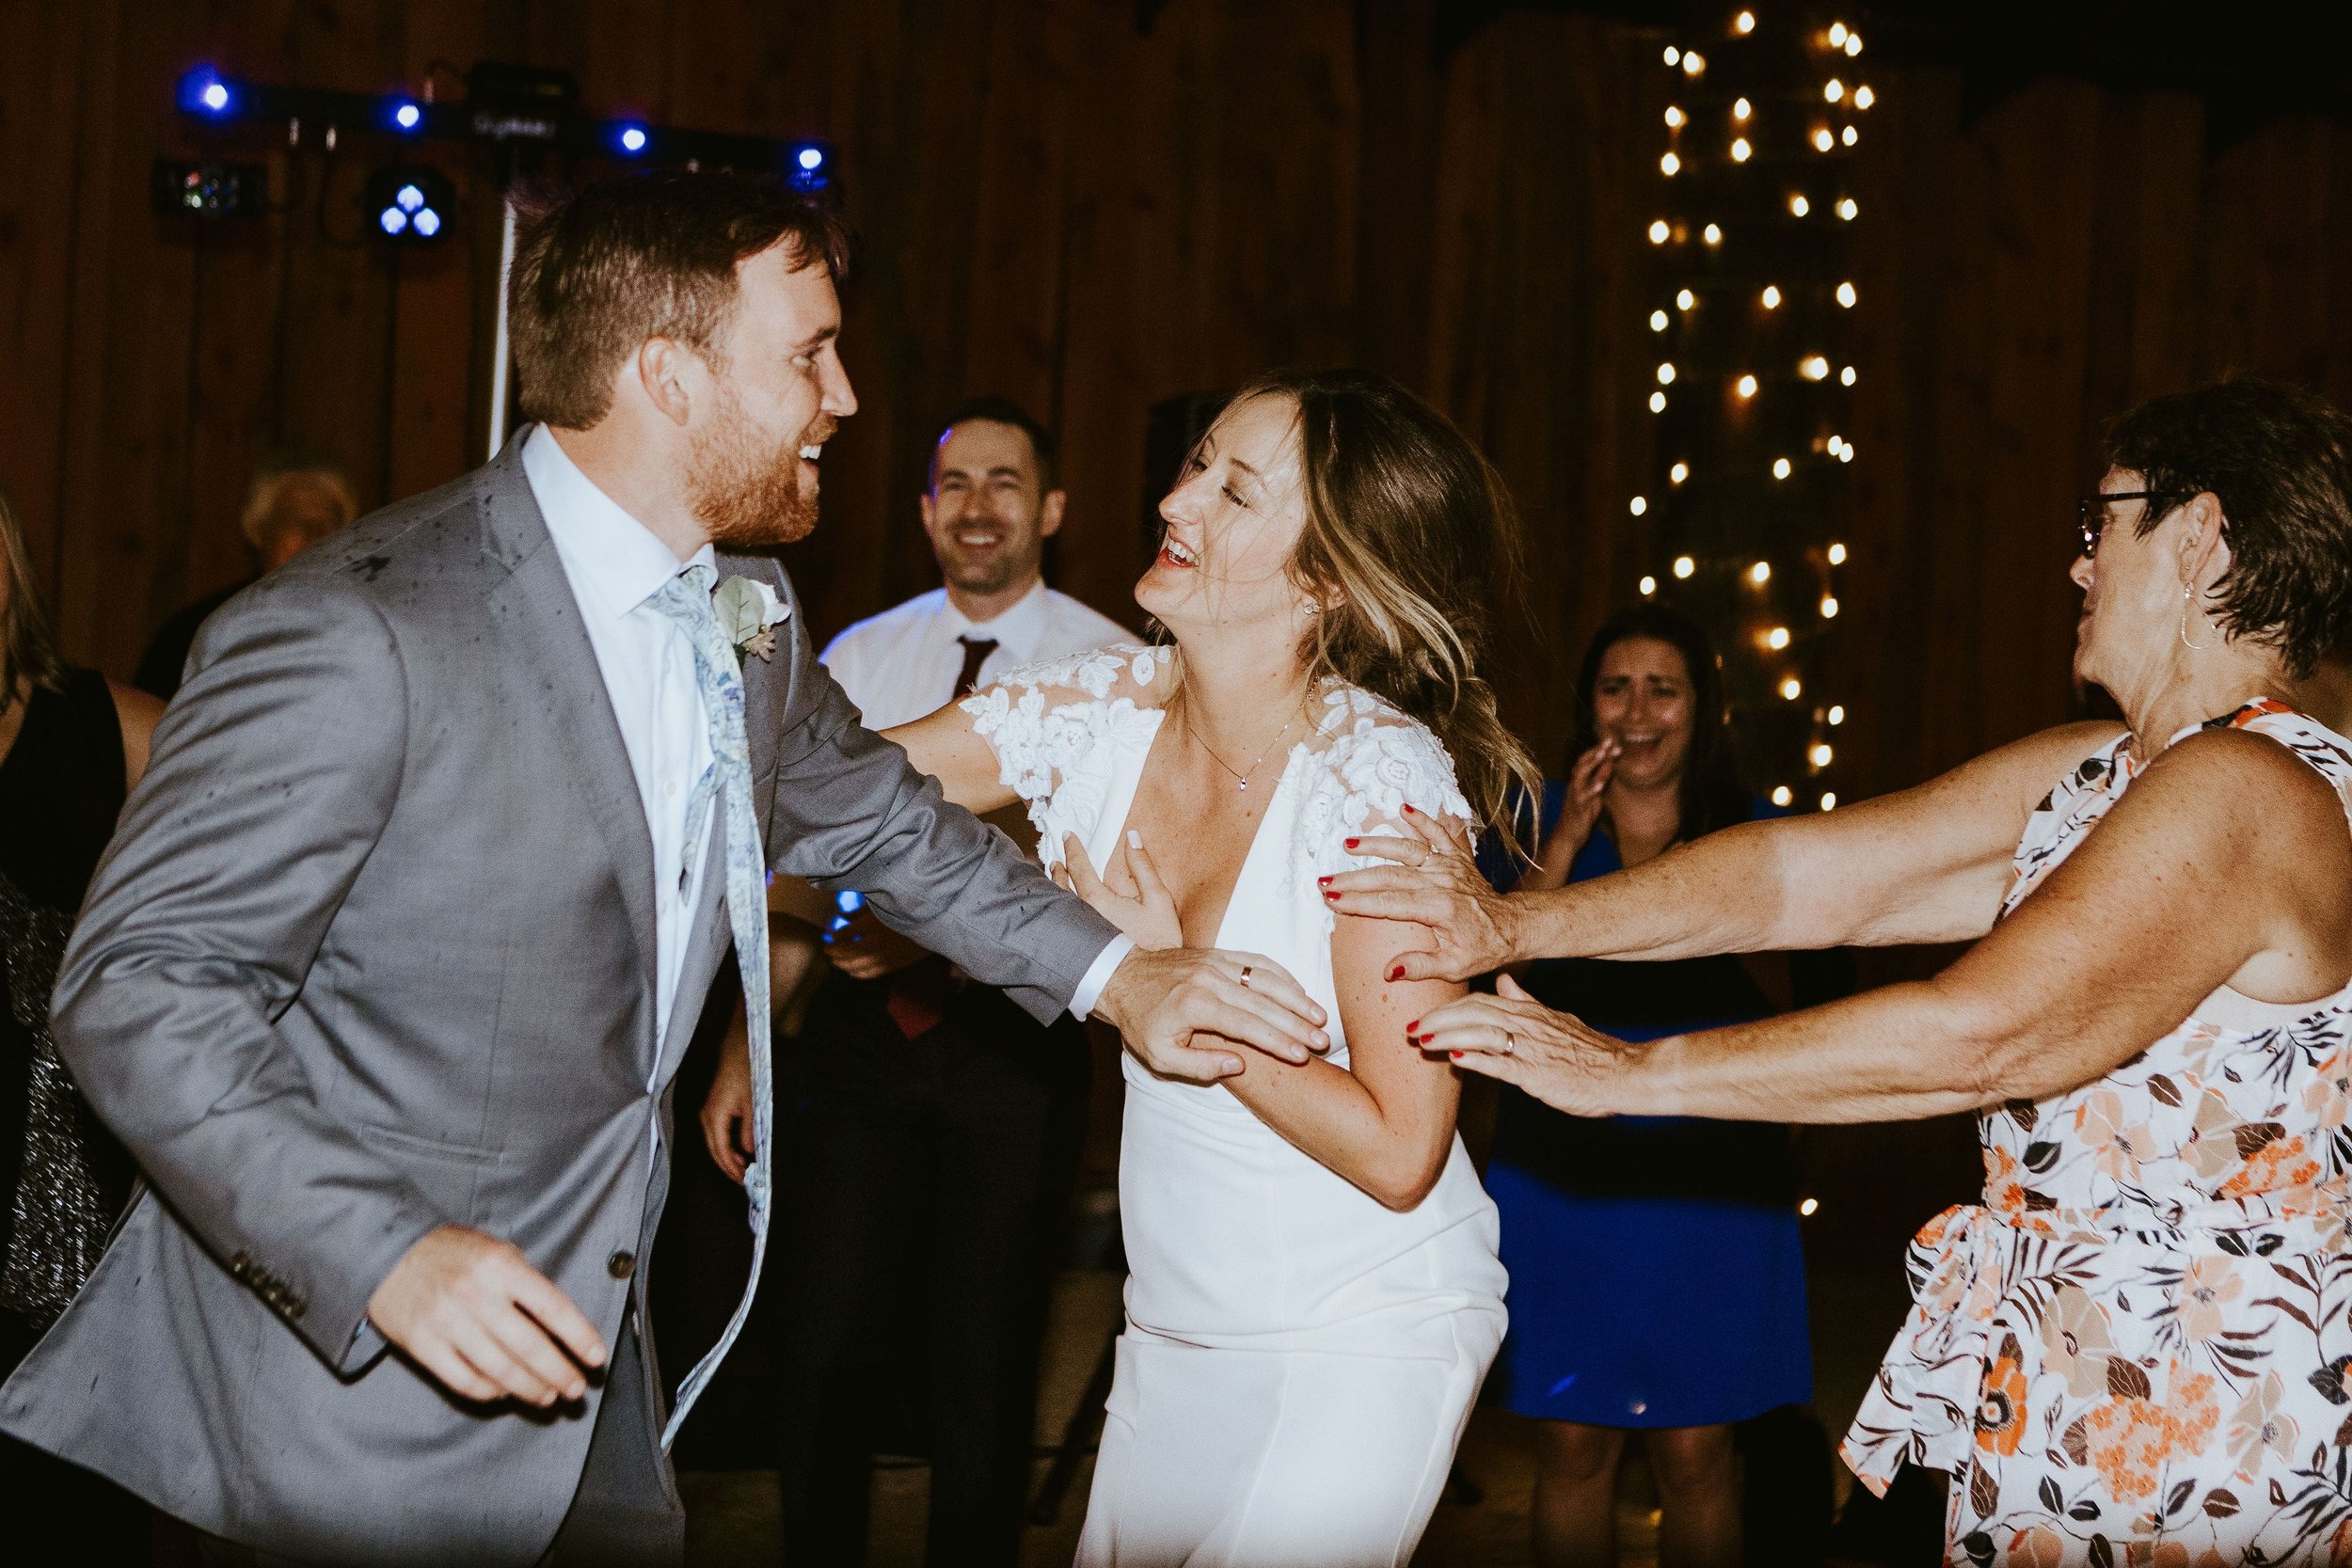 Bride and groom dancing with guests at their fall wedding reception in Arizona